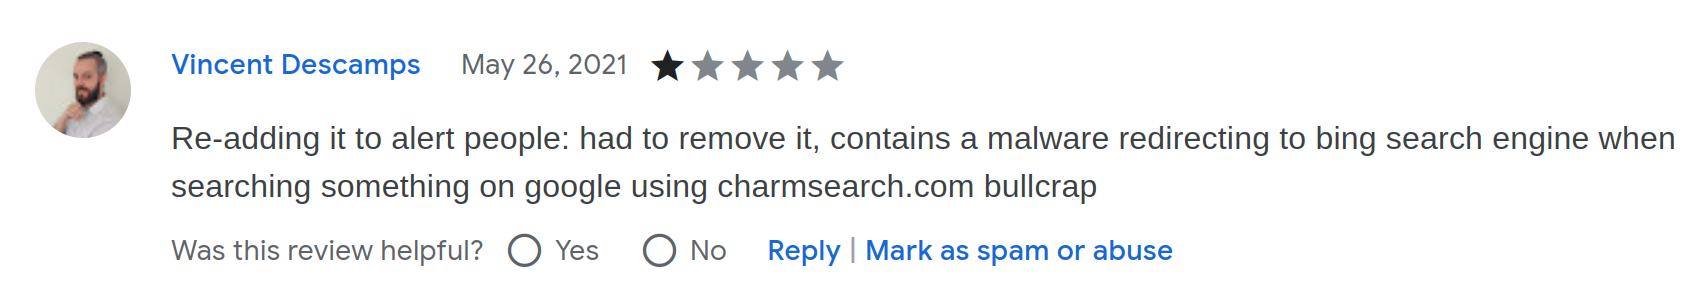 Review by Vincent Descamps: Re-adding it to alert people: had to remove it, contains a malware redirecting to bing search engine when searching something on google using charmsearch.com bullcrap